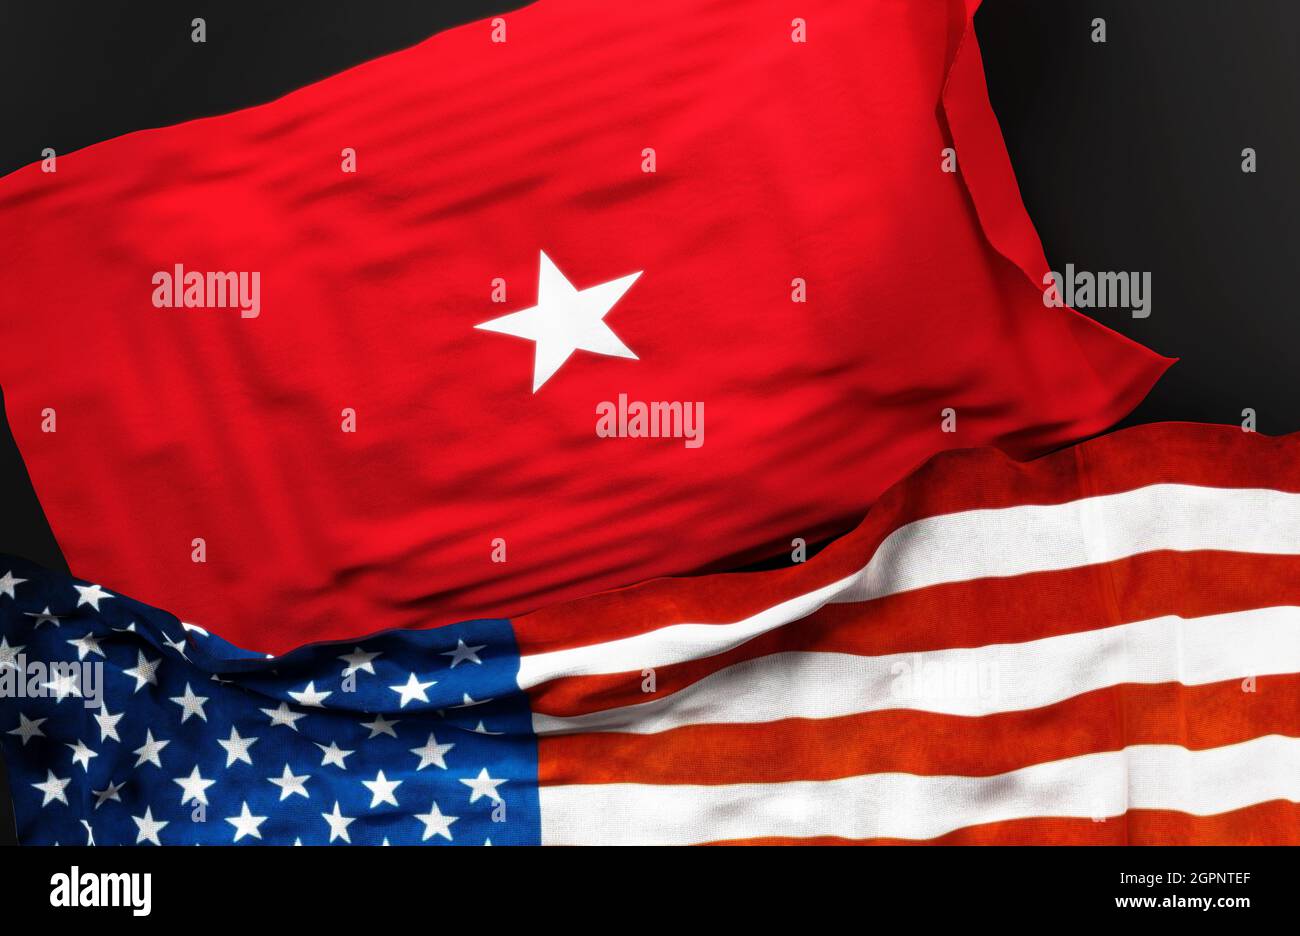 Flag of a United States Marine Corps brigadier general along with a flag of the United States of America as a symbol of unity between them, 3d illustr Stock Photo